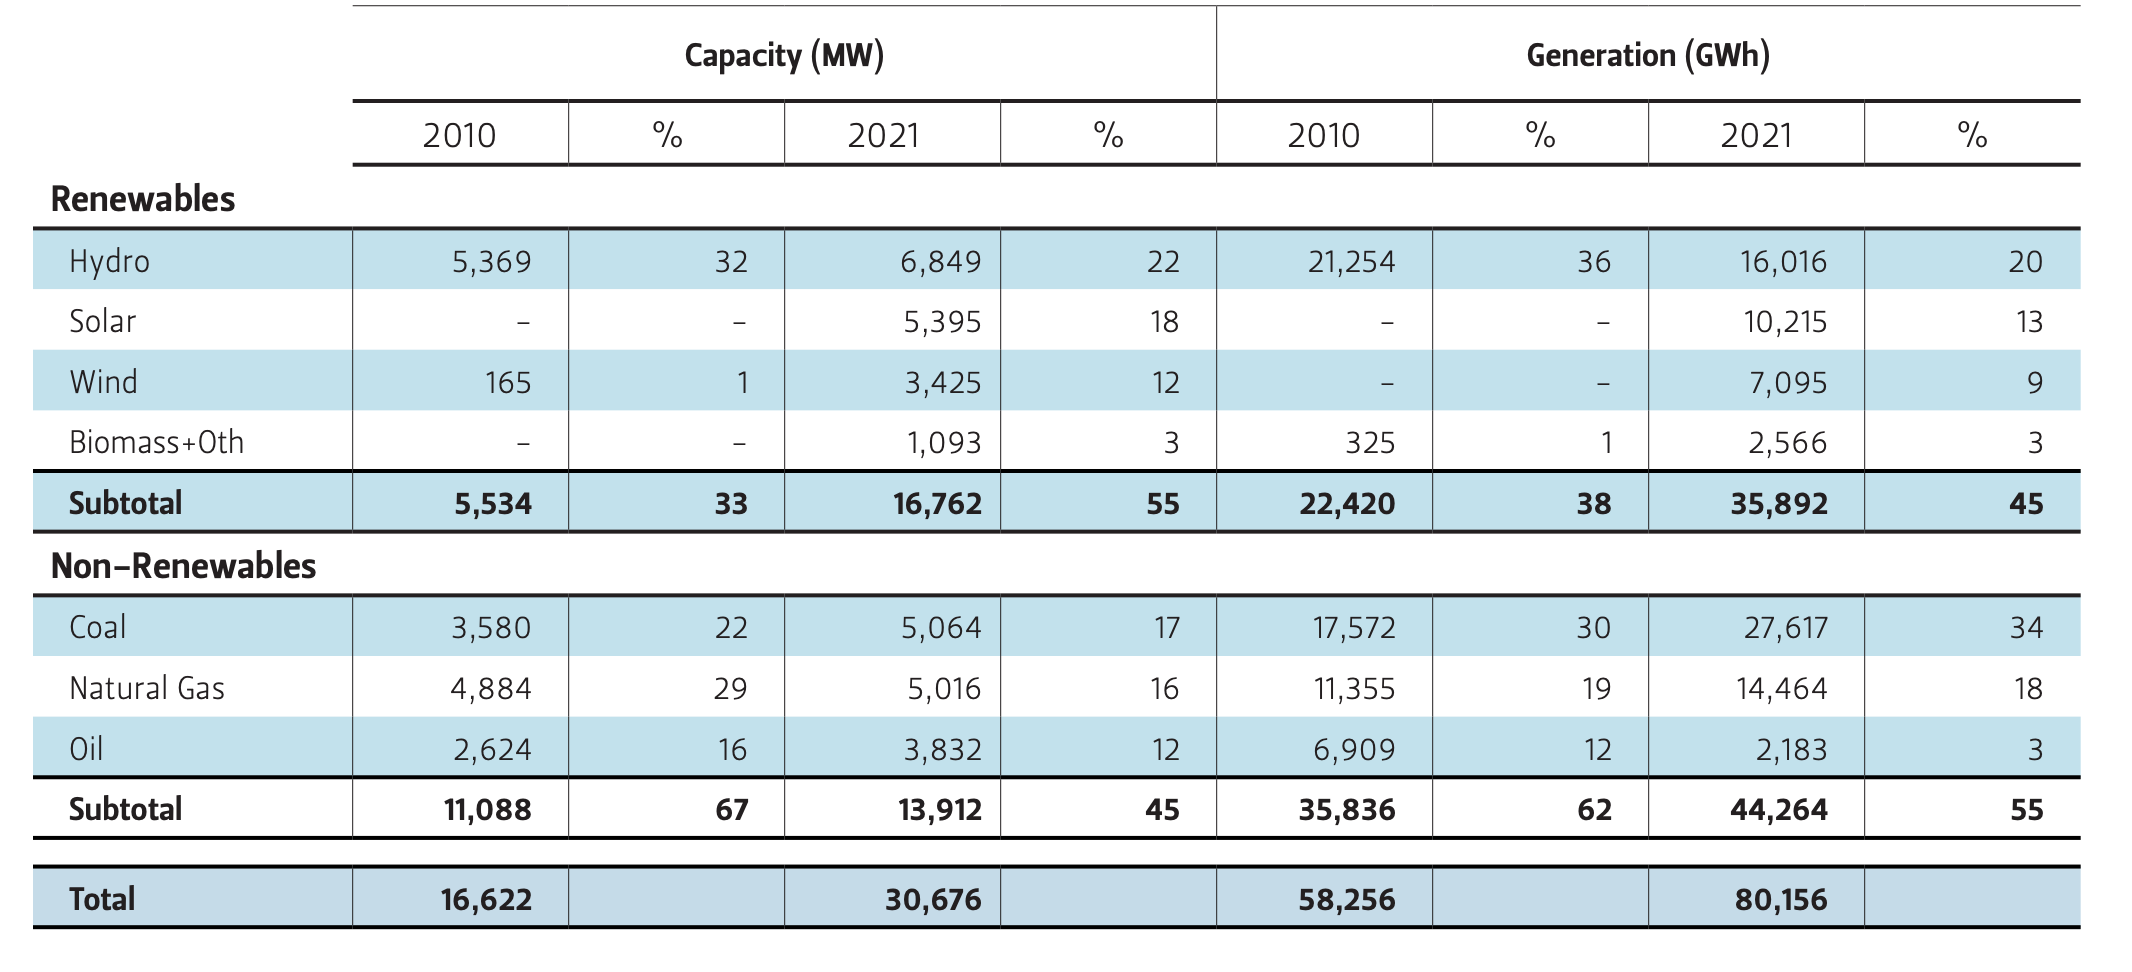 TABLE 2 — CHILE’S INSTALLED ELECTRICITY CAPACITY AND GENERATION BY SOURCE